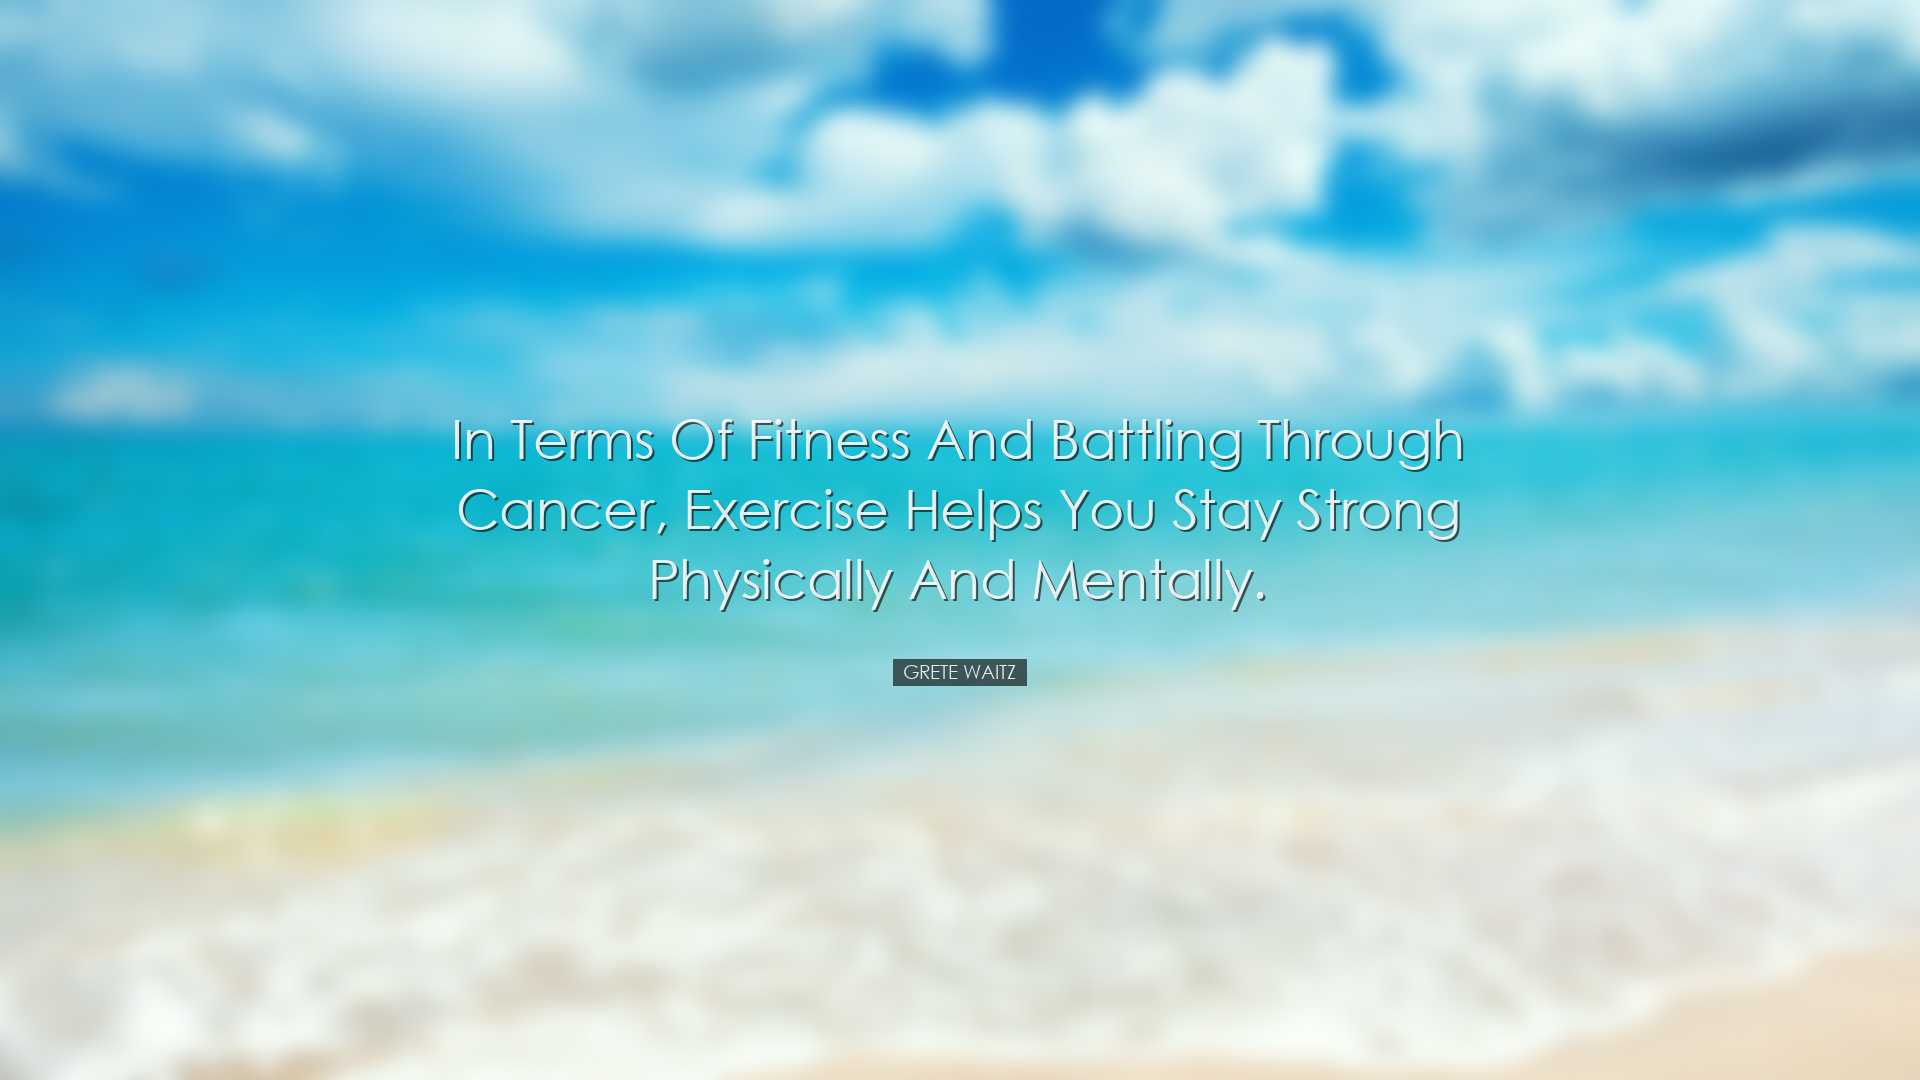 In terms of fitness and battling through cancer, exercise helps yo